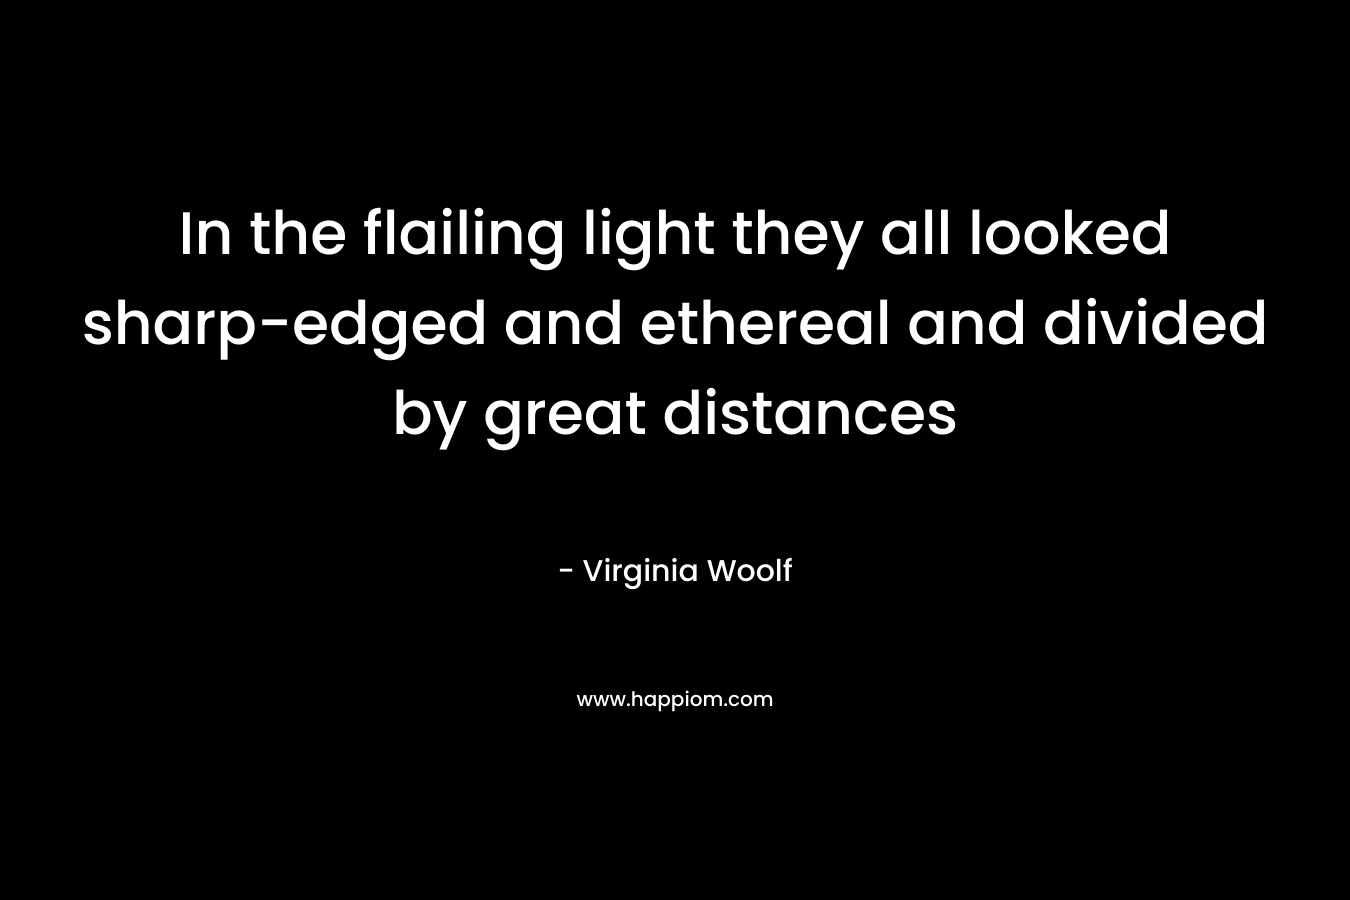 In the flailing light they all looked sharp-edged and ethereal and divided by great distances – Virginia Woolf